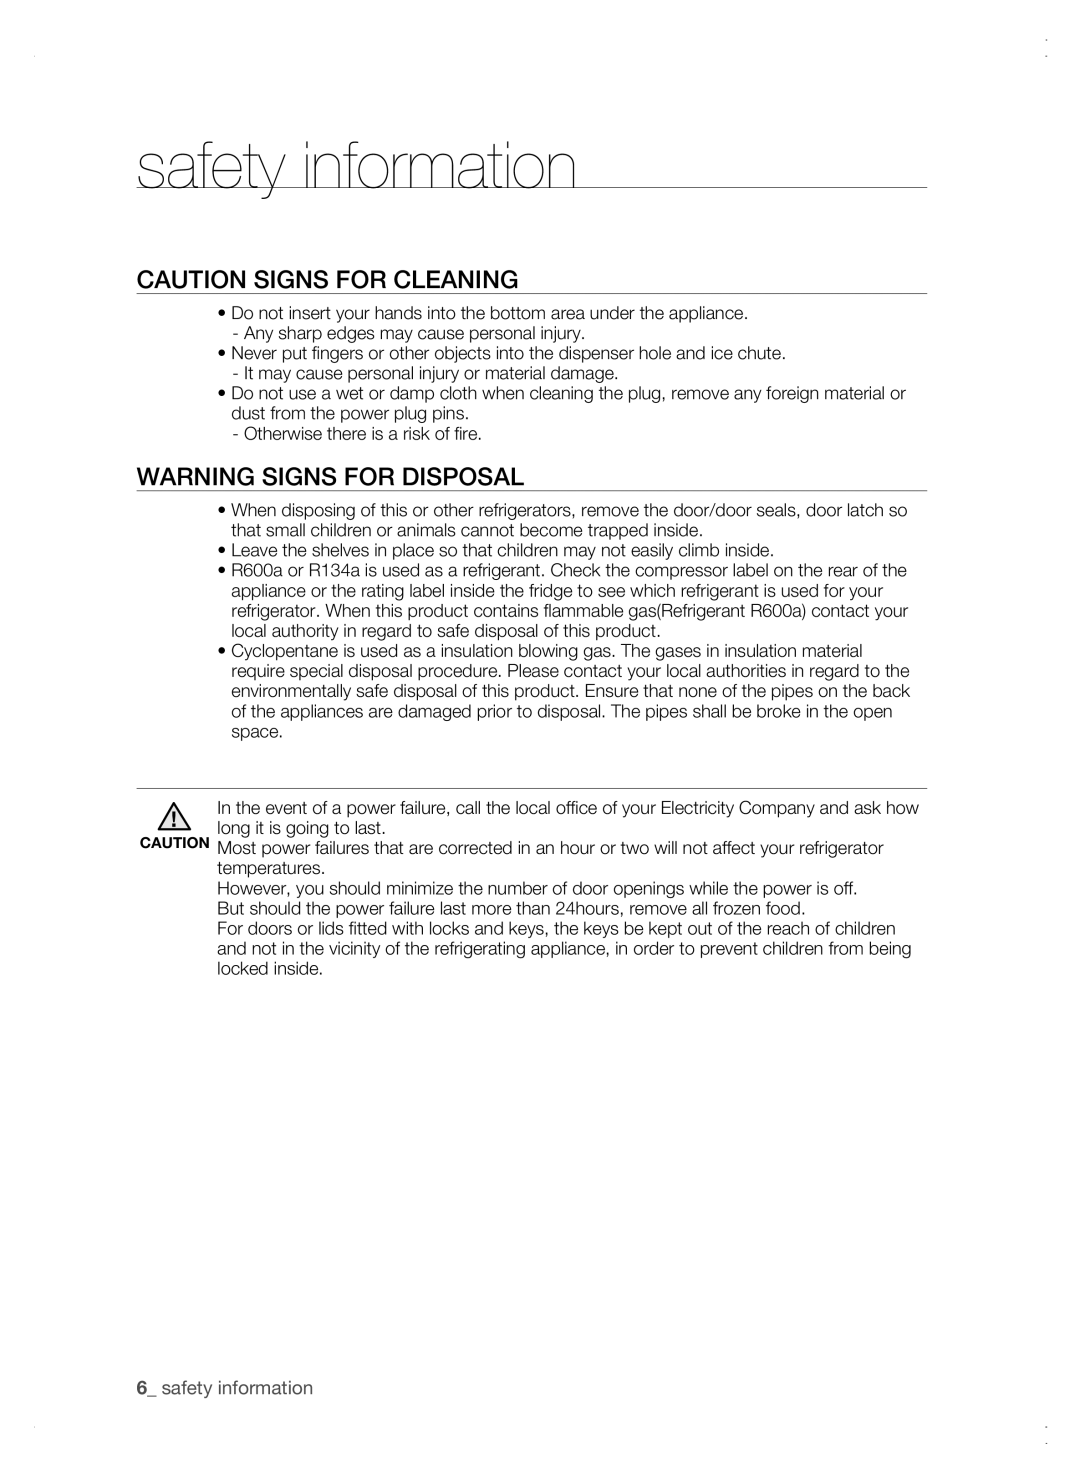 Samsung RSG5 user manual Caution Signs For Cleaning, Warning Signs For Disposal,  safety information 